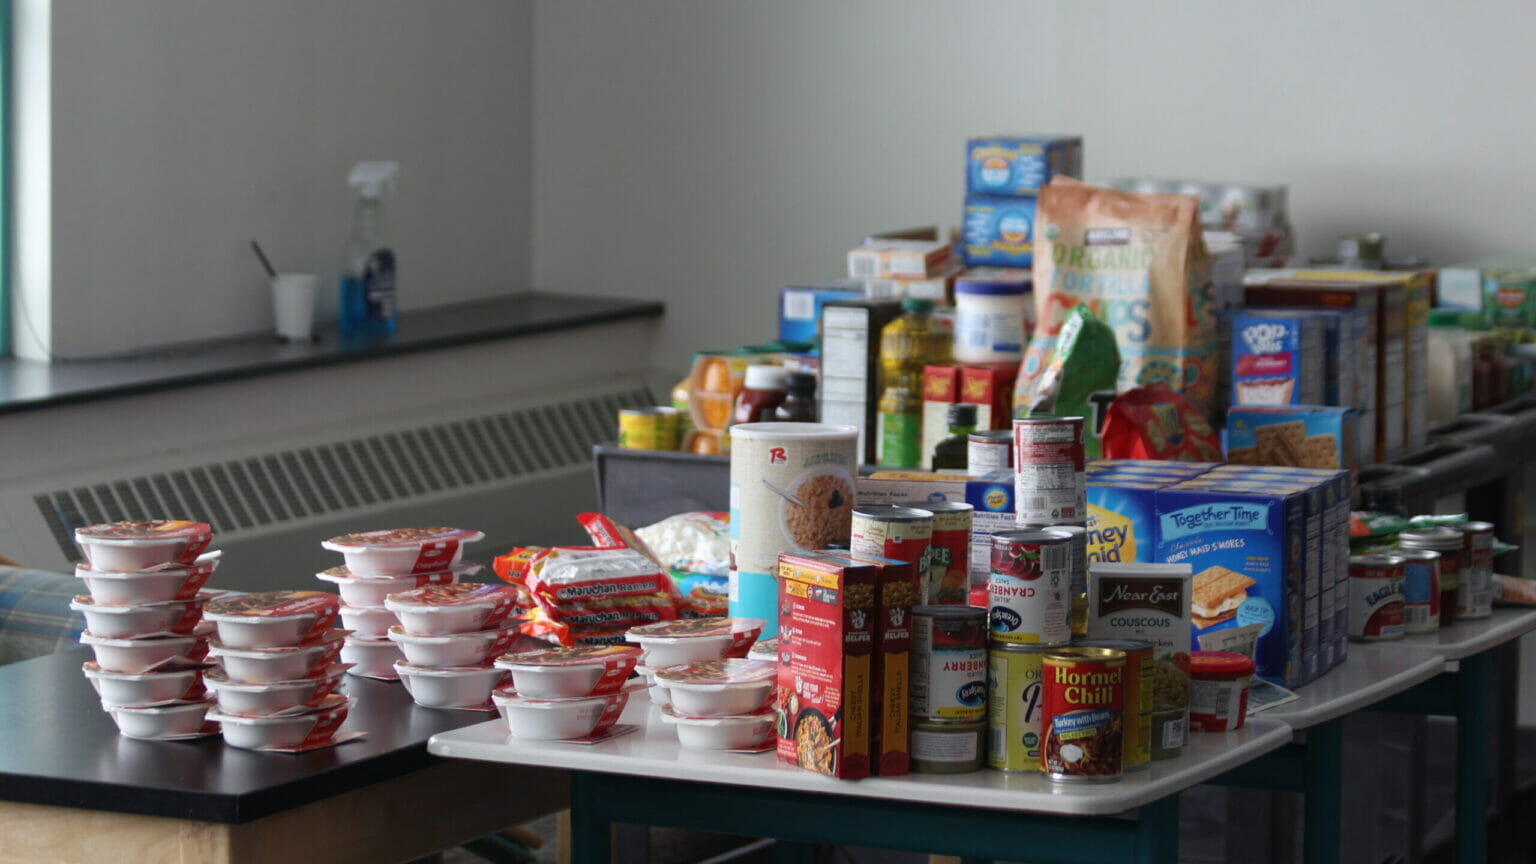 As state grapples with food stamp backlog, Anchorage middle school steps up to feed families